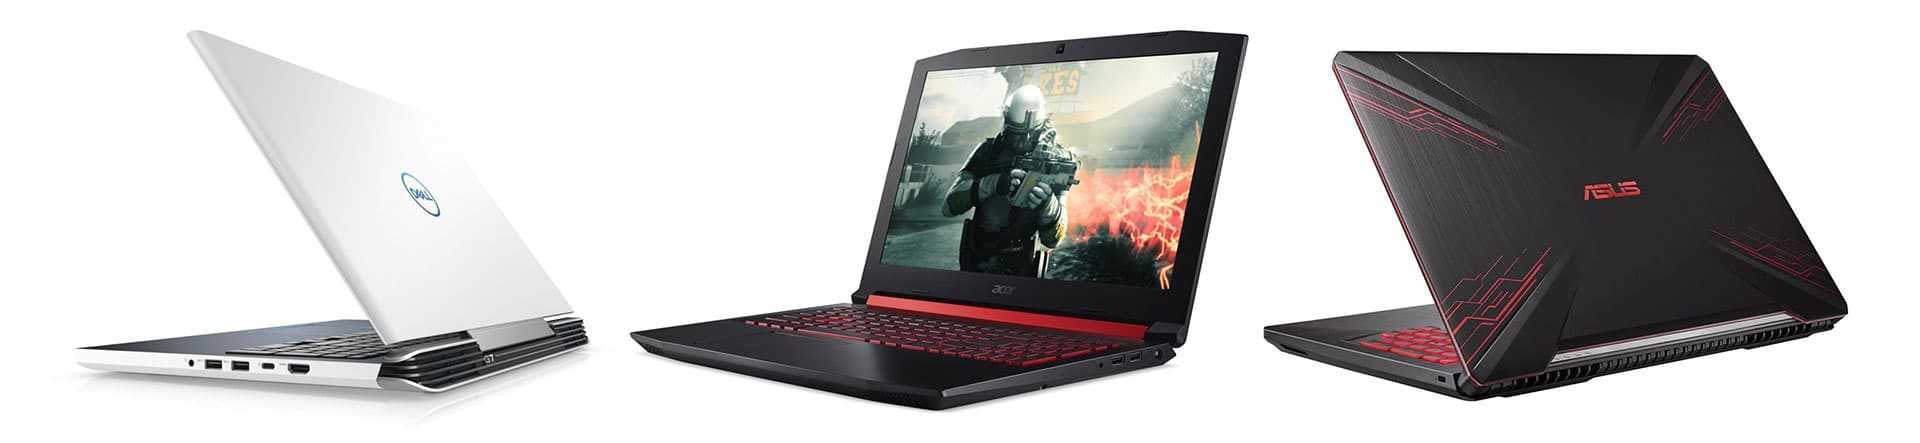 Full size 1050 Ti gaming laptops: Dell G7 (left), Asus TUF FX504 (middle) and Acer Nitro 5 (right)